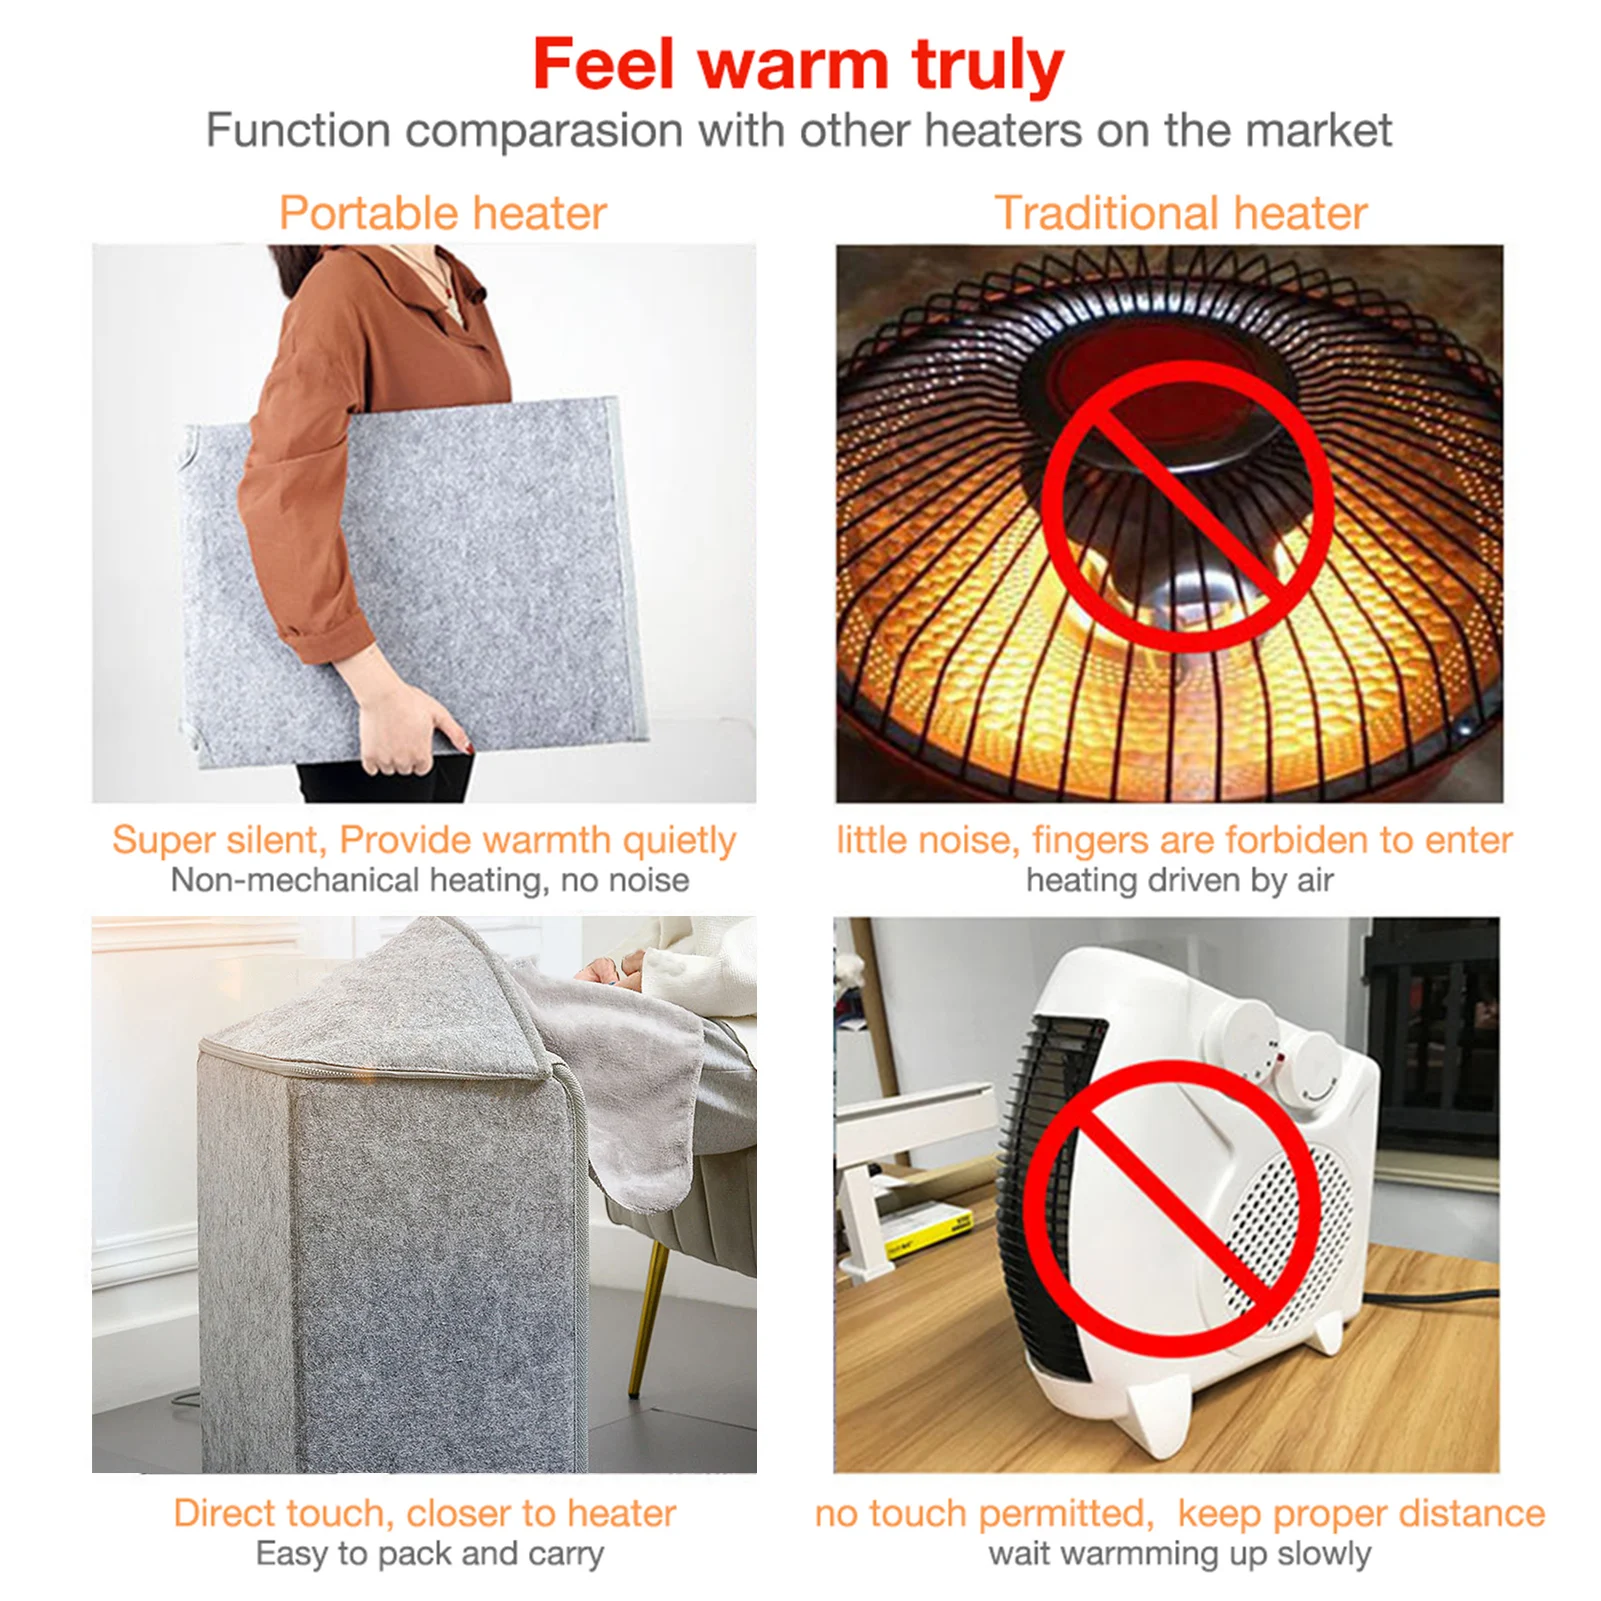 

210W 5 Modes Winter Folding Heater Portable Far Infrared Foot Warmer For Home Office Electric Leg Heater Olding Warmer Cushion